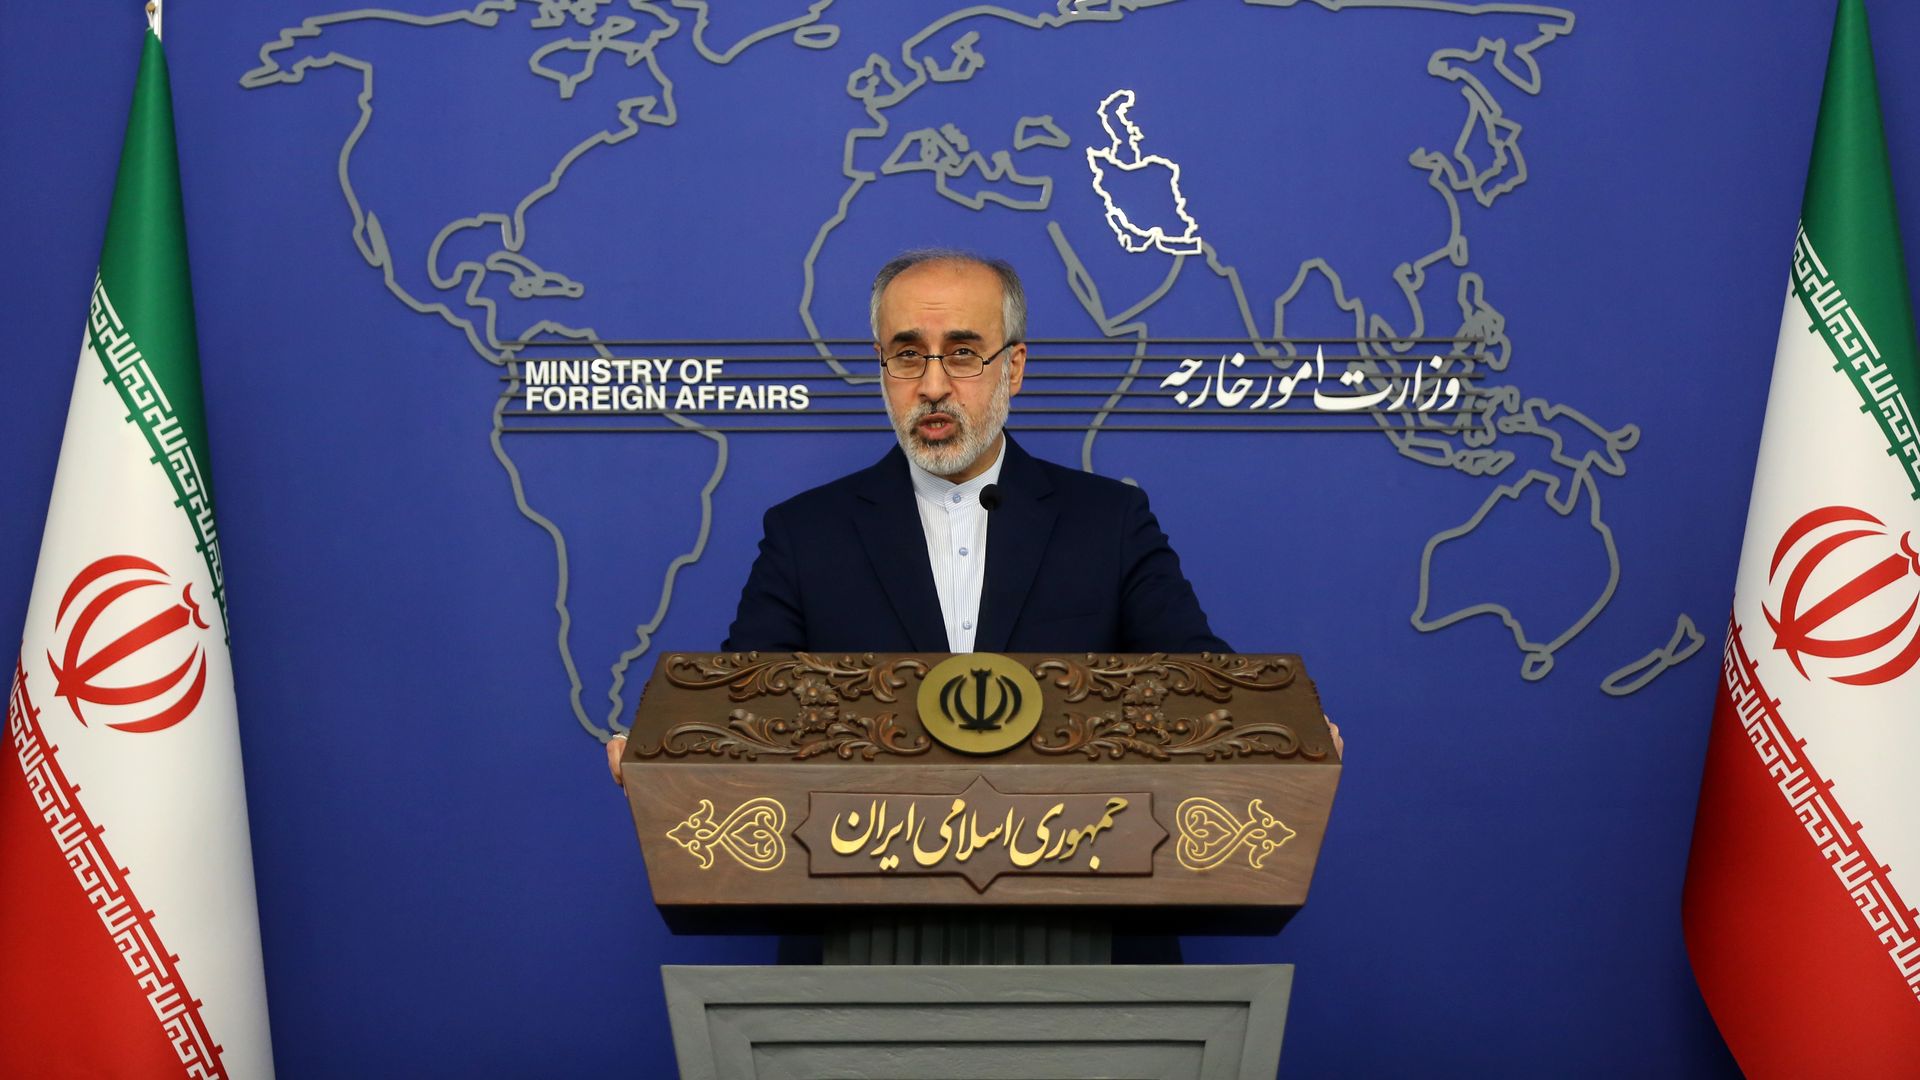  Iran's Foreign Ministry spokesman Nasser Kanani holds a press conference in Tehran, Iran on December 5, 2022